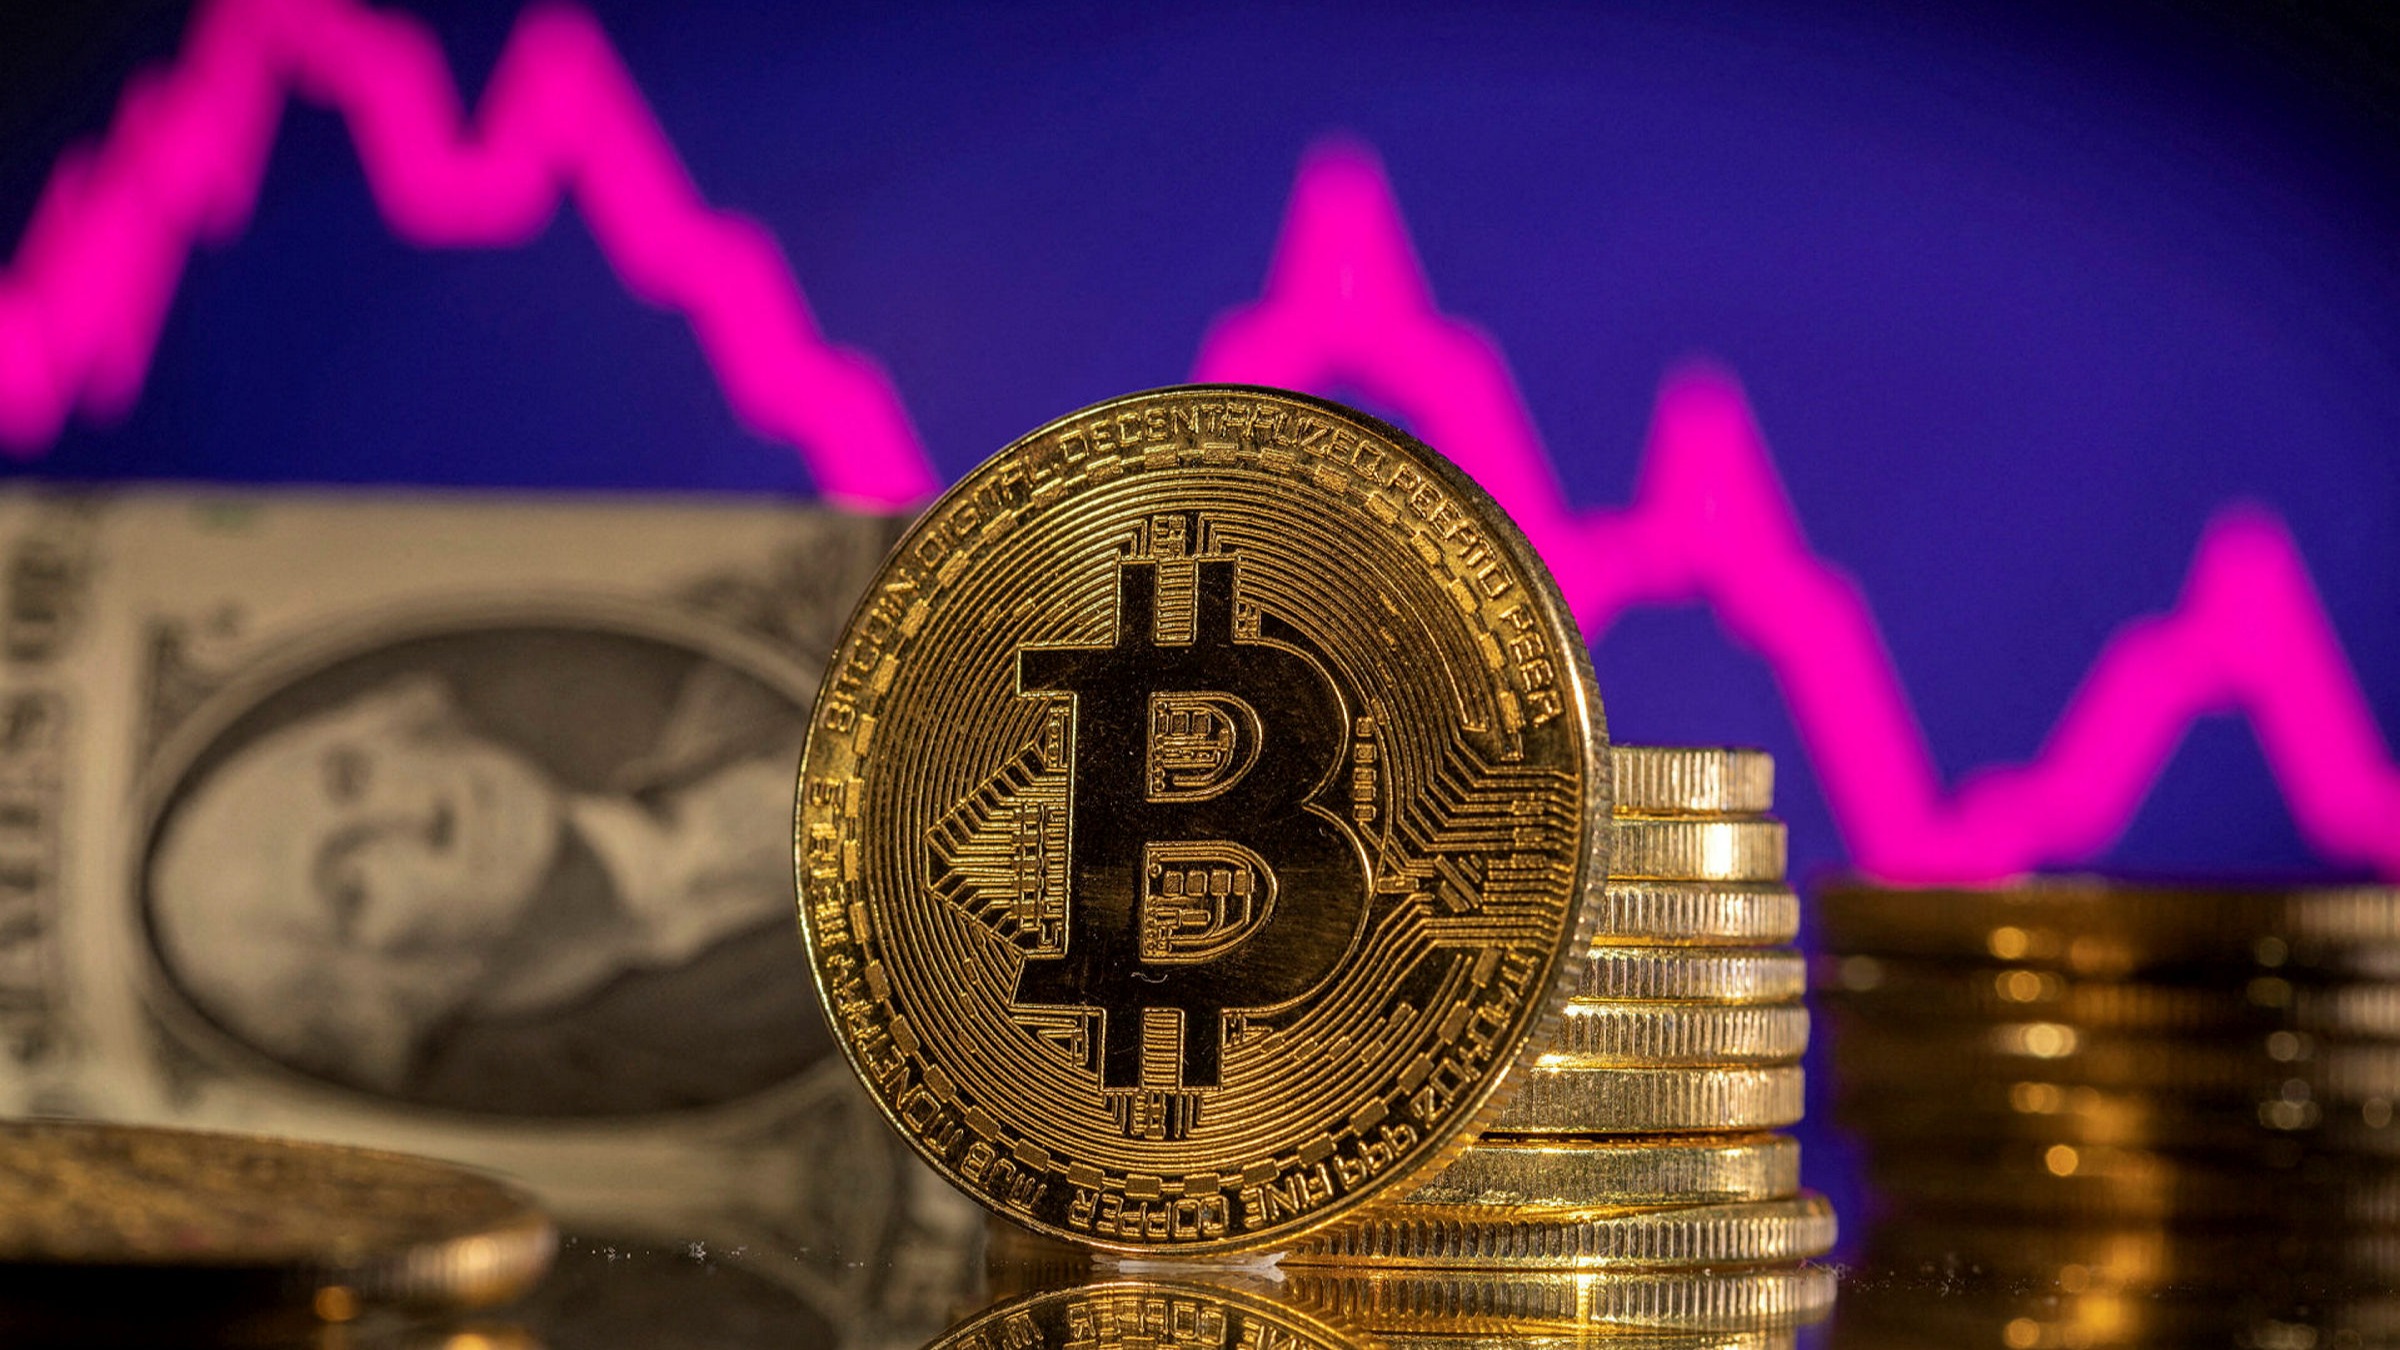 Data shows that bitcoin is more stable than individual U.S. stocks